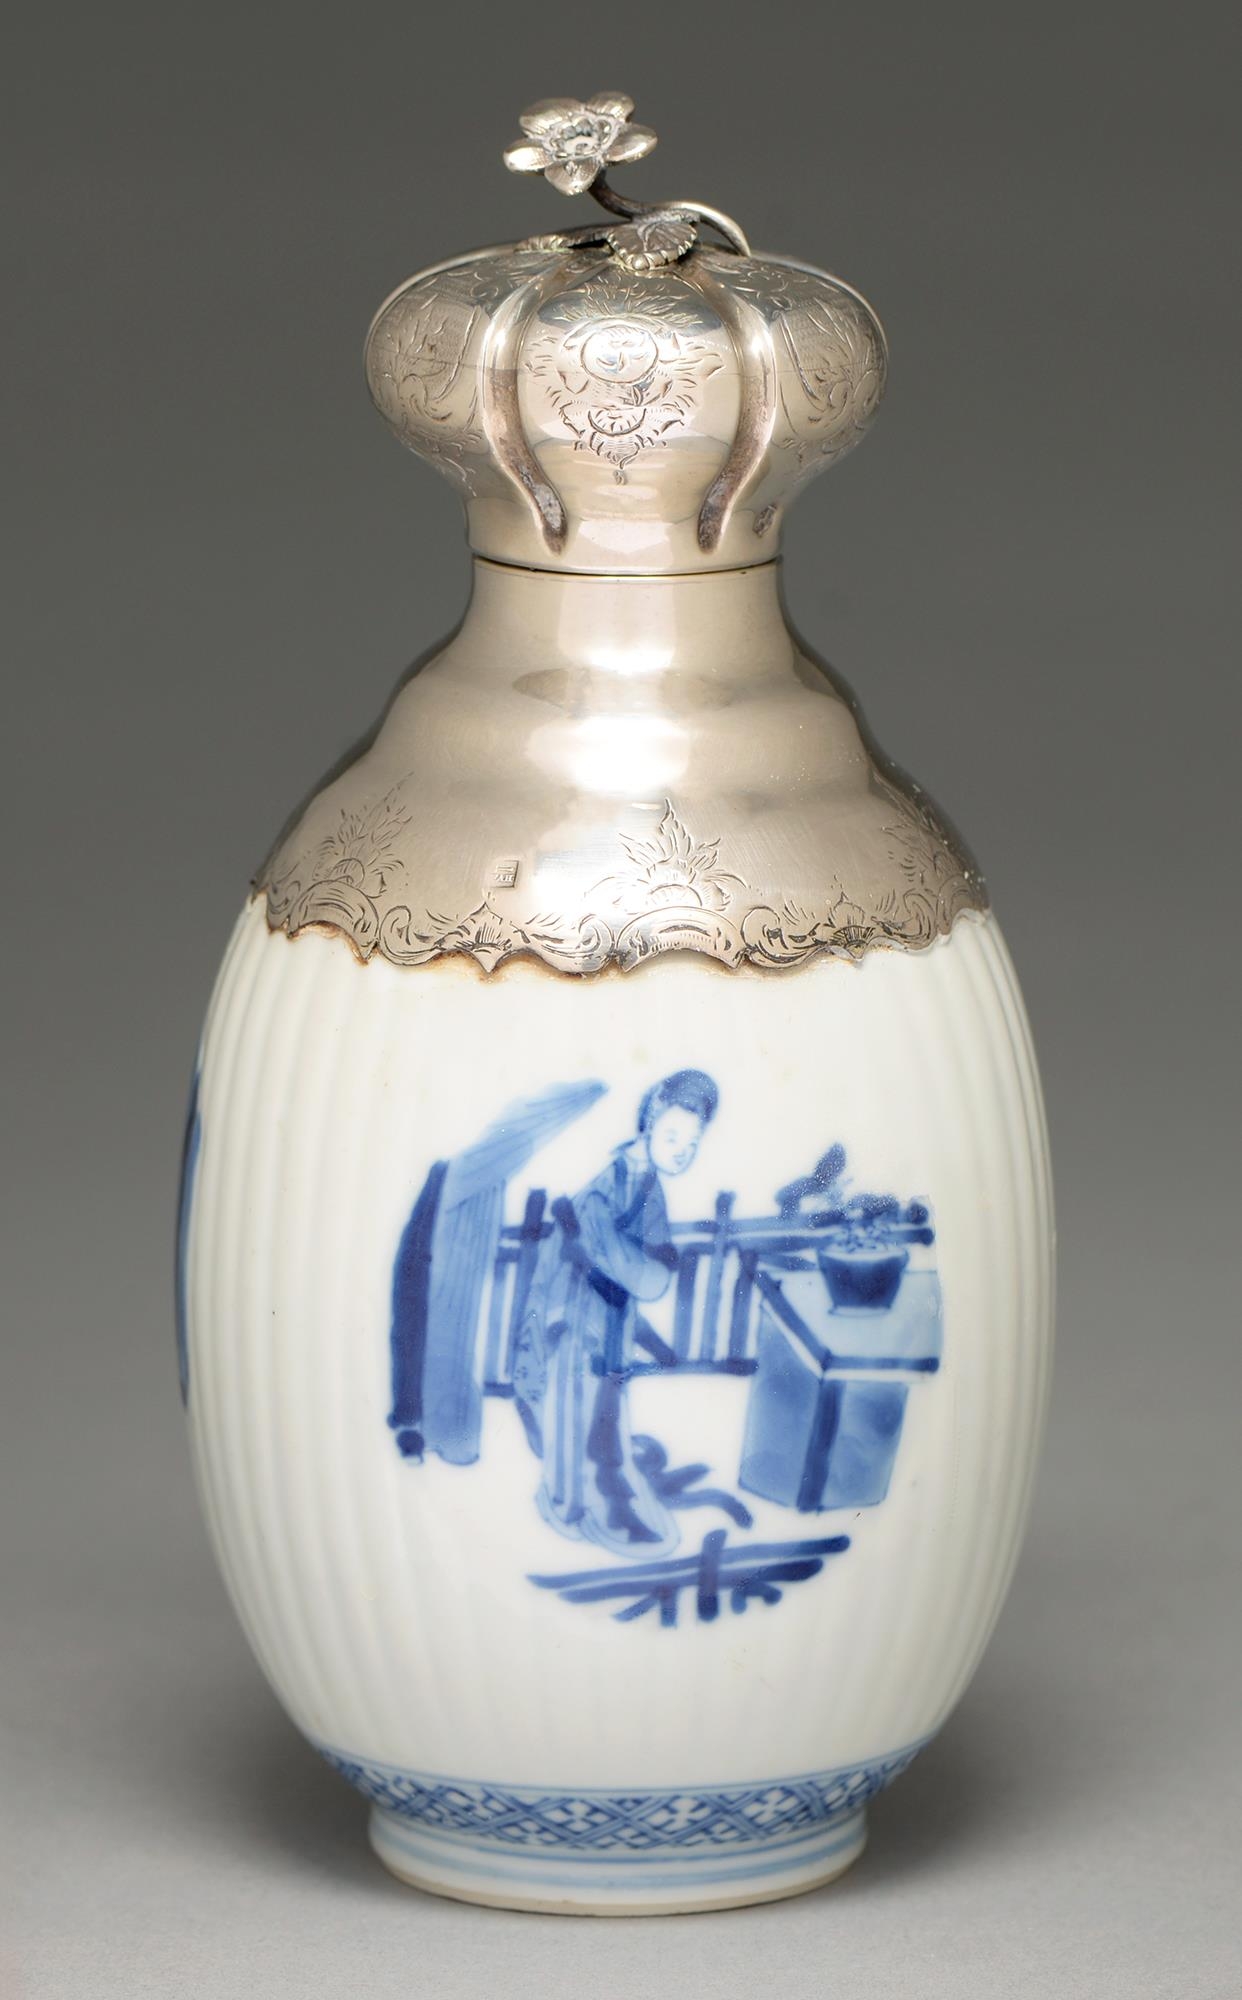 A Chinese blue and white reeded oviform jar, 18th c, painted with a lady in an interior, later